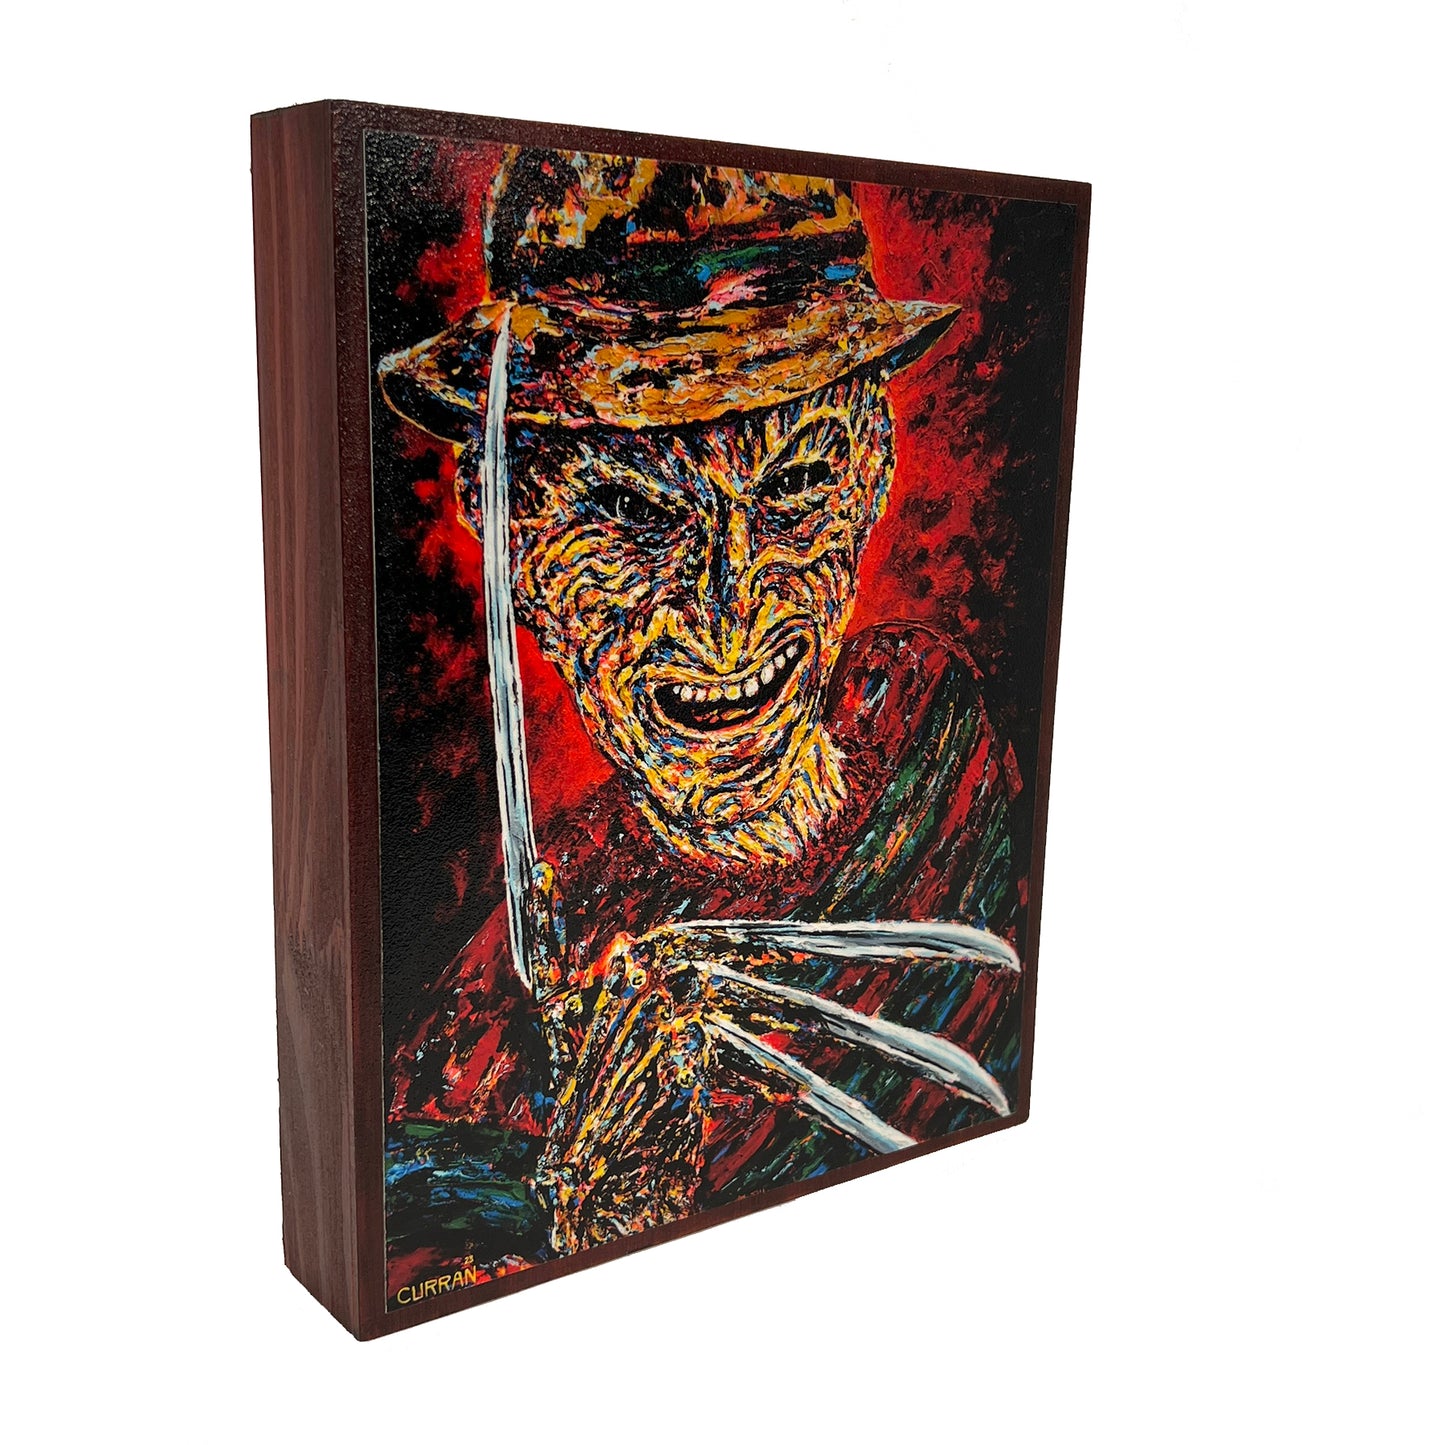 Freddy on Wood Panel (Limited Edition)